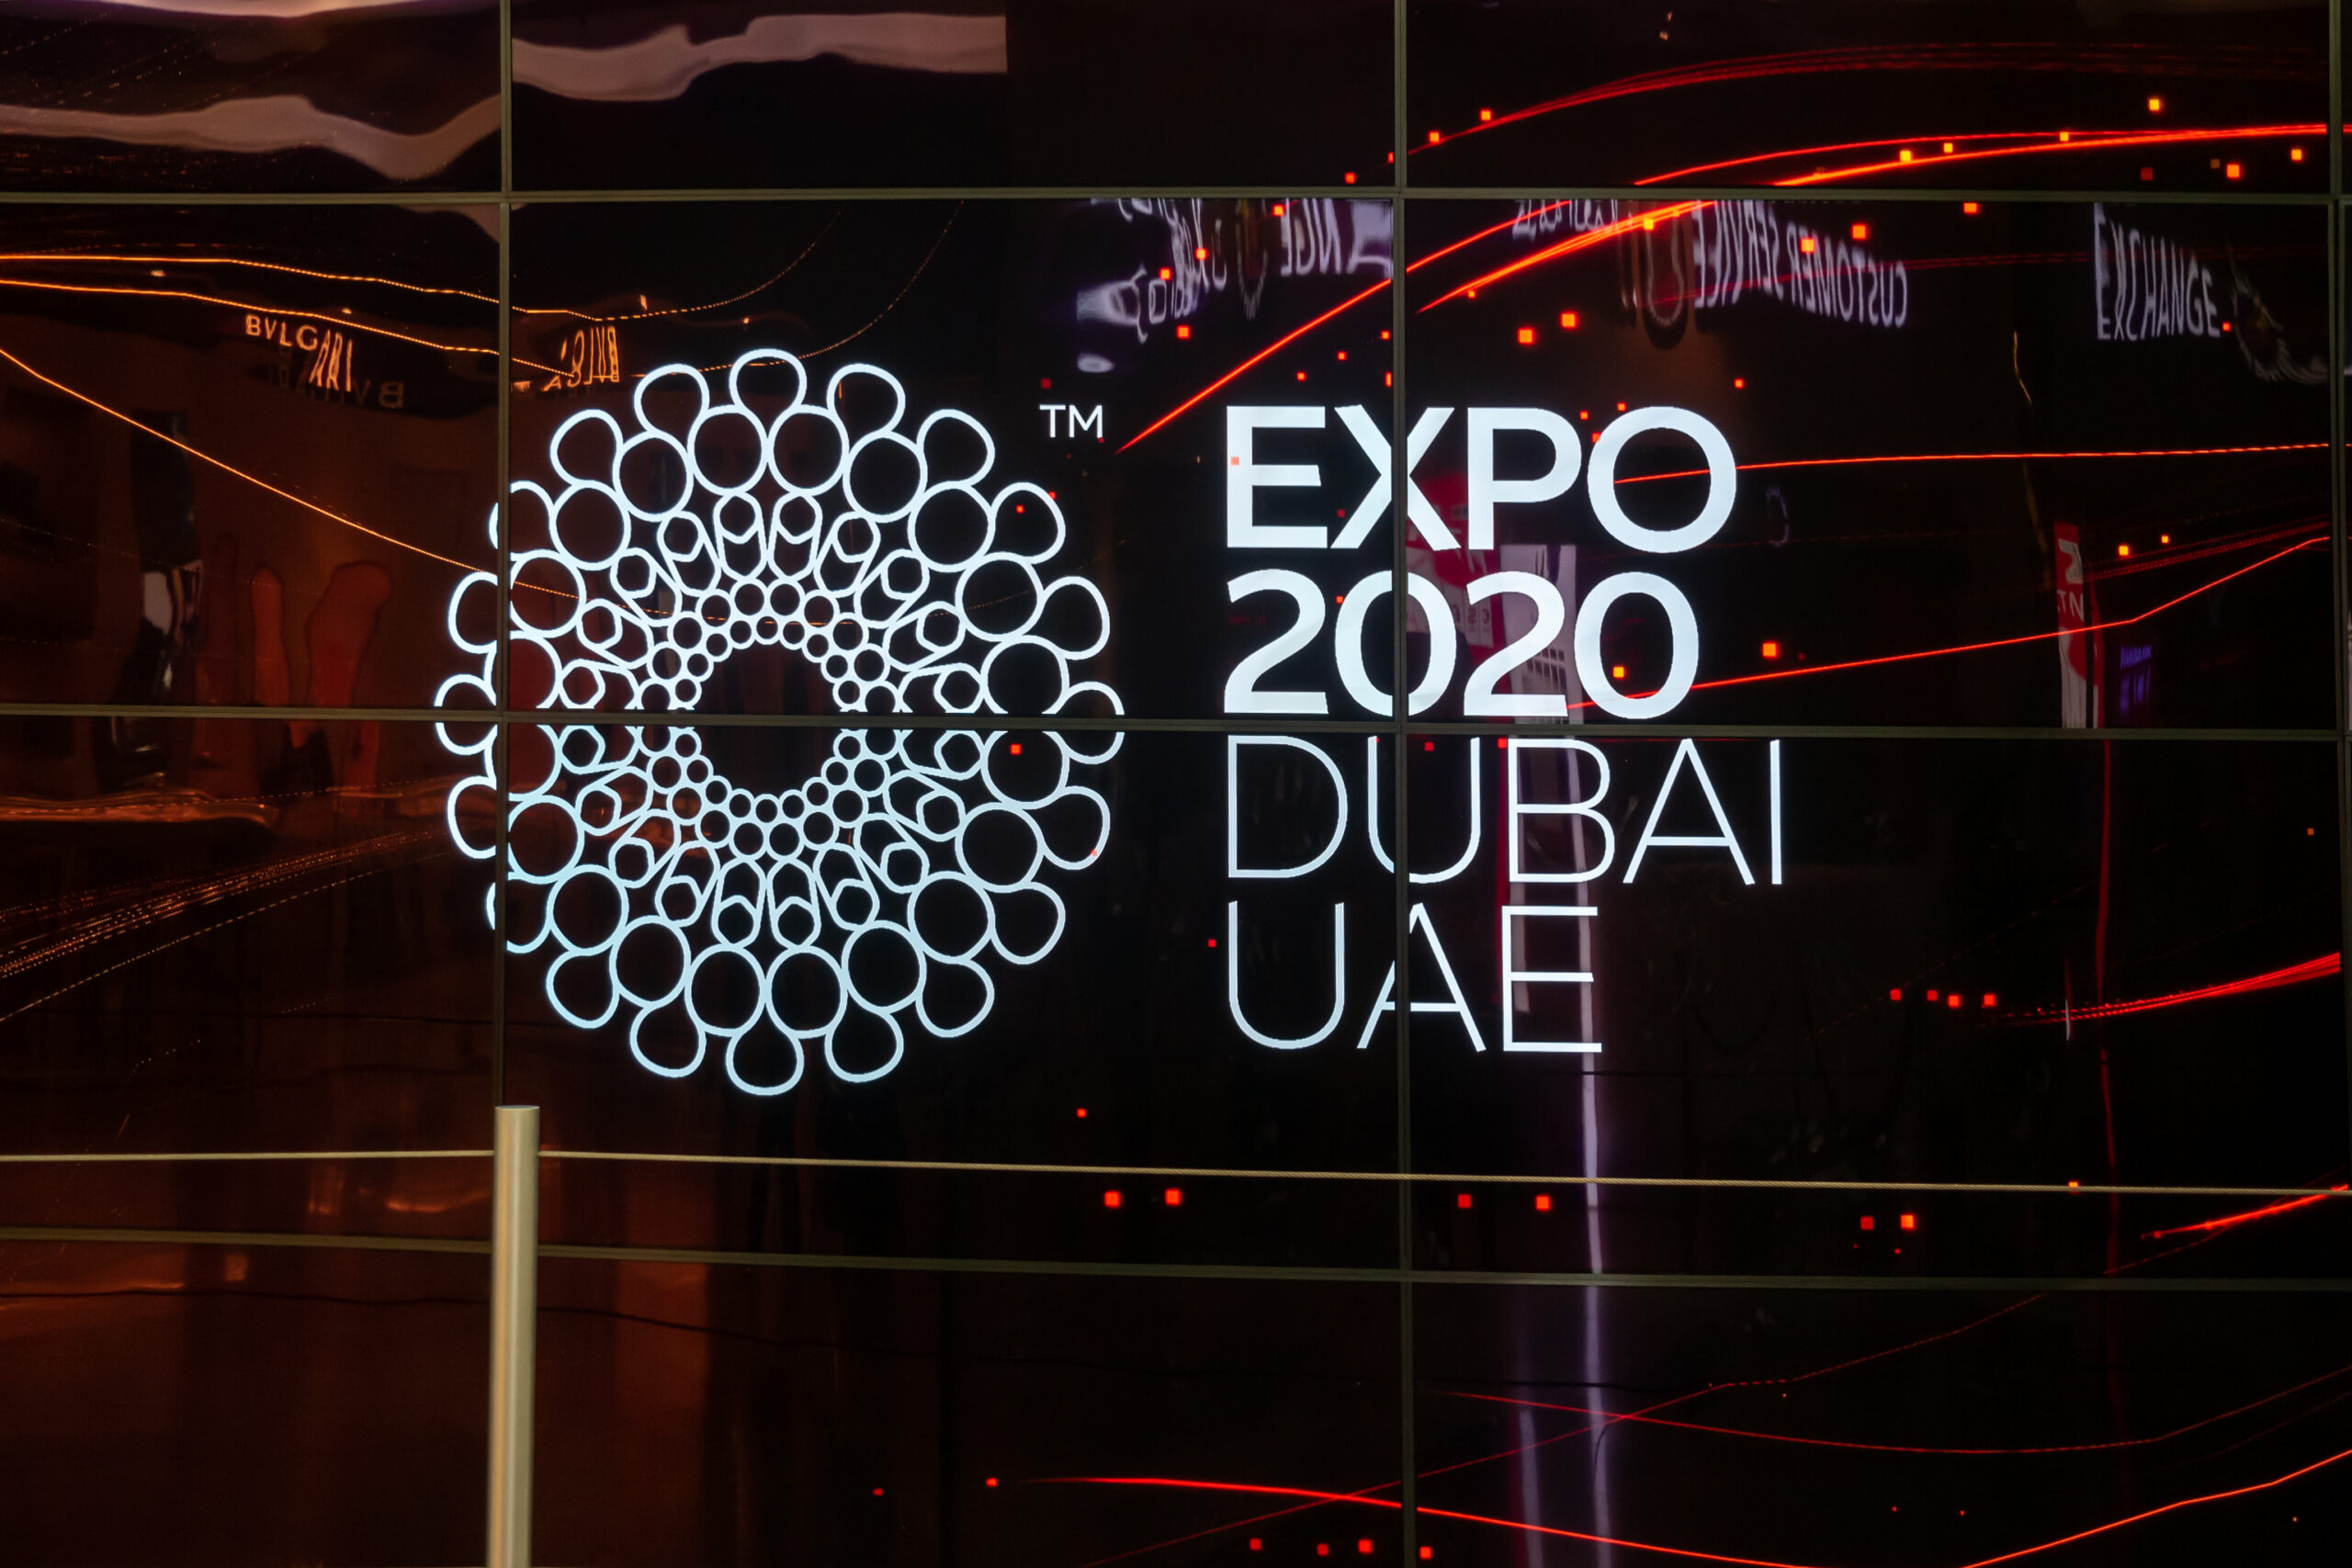 Expo 2020 Dubai: A quick look at country pavilions